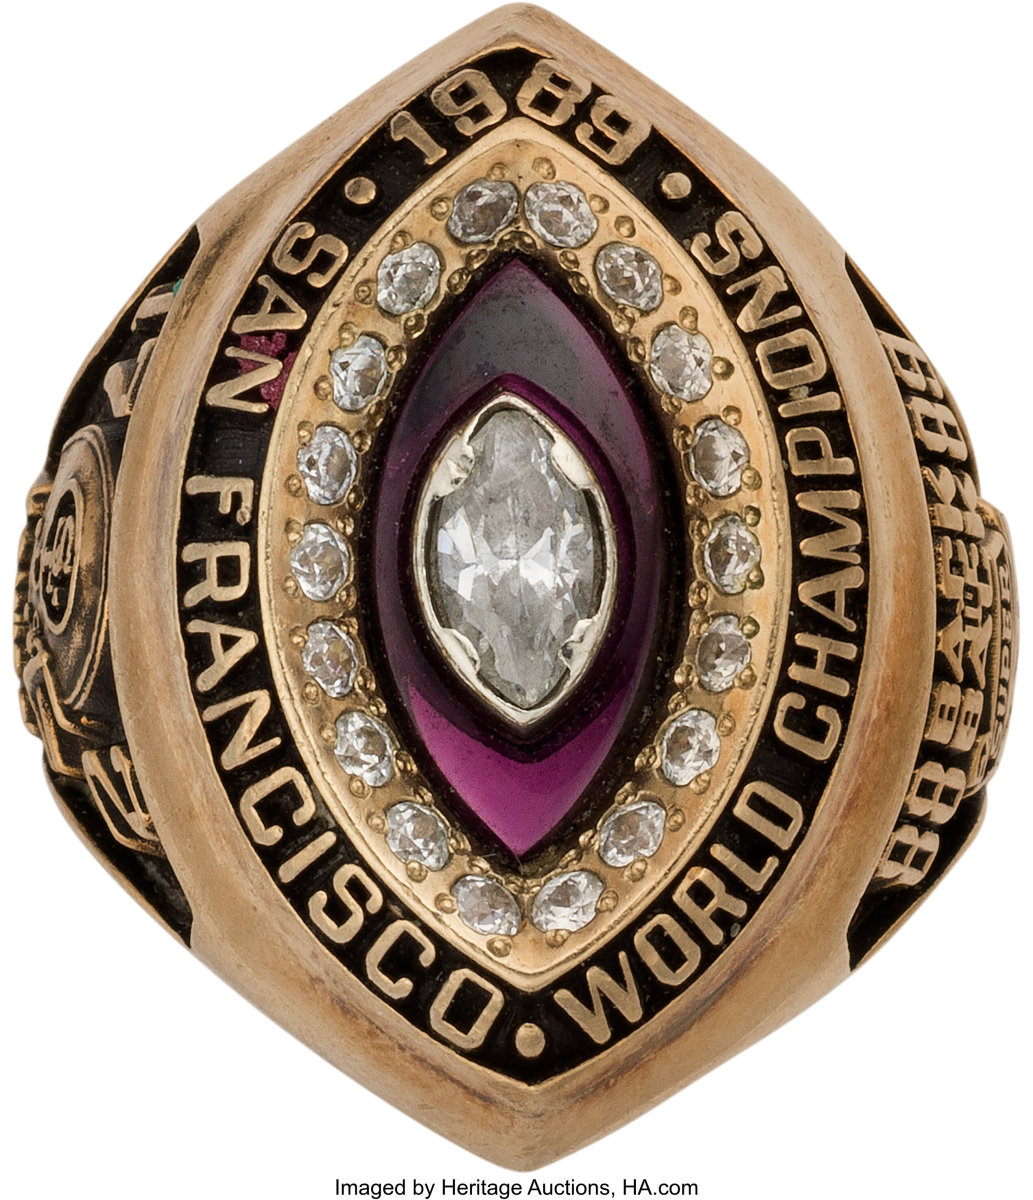 1990 San Francisco 49ers Super Bowl ring presented to Jerry Rice's wife.